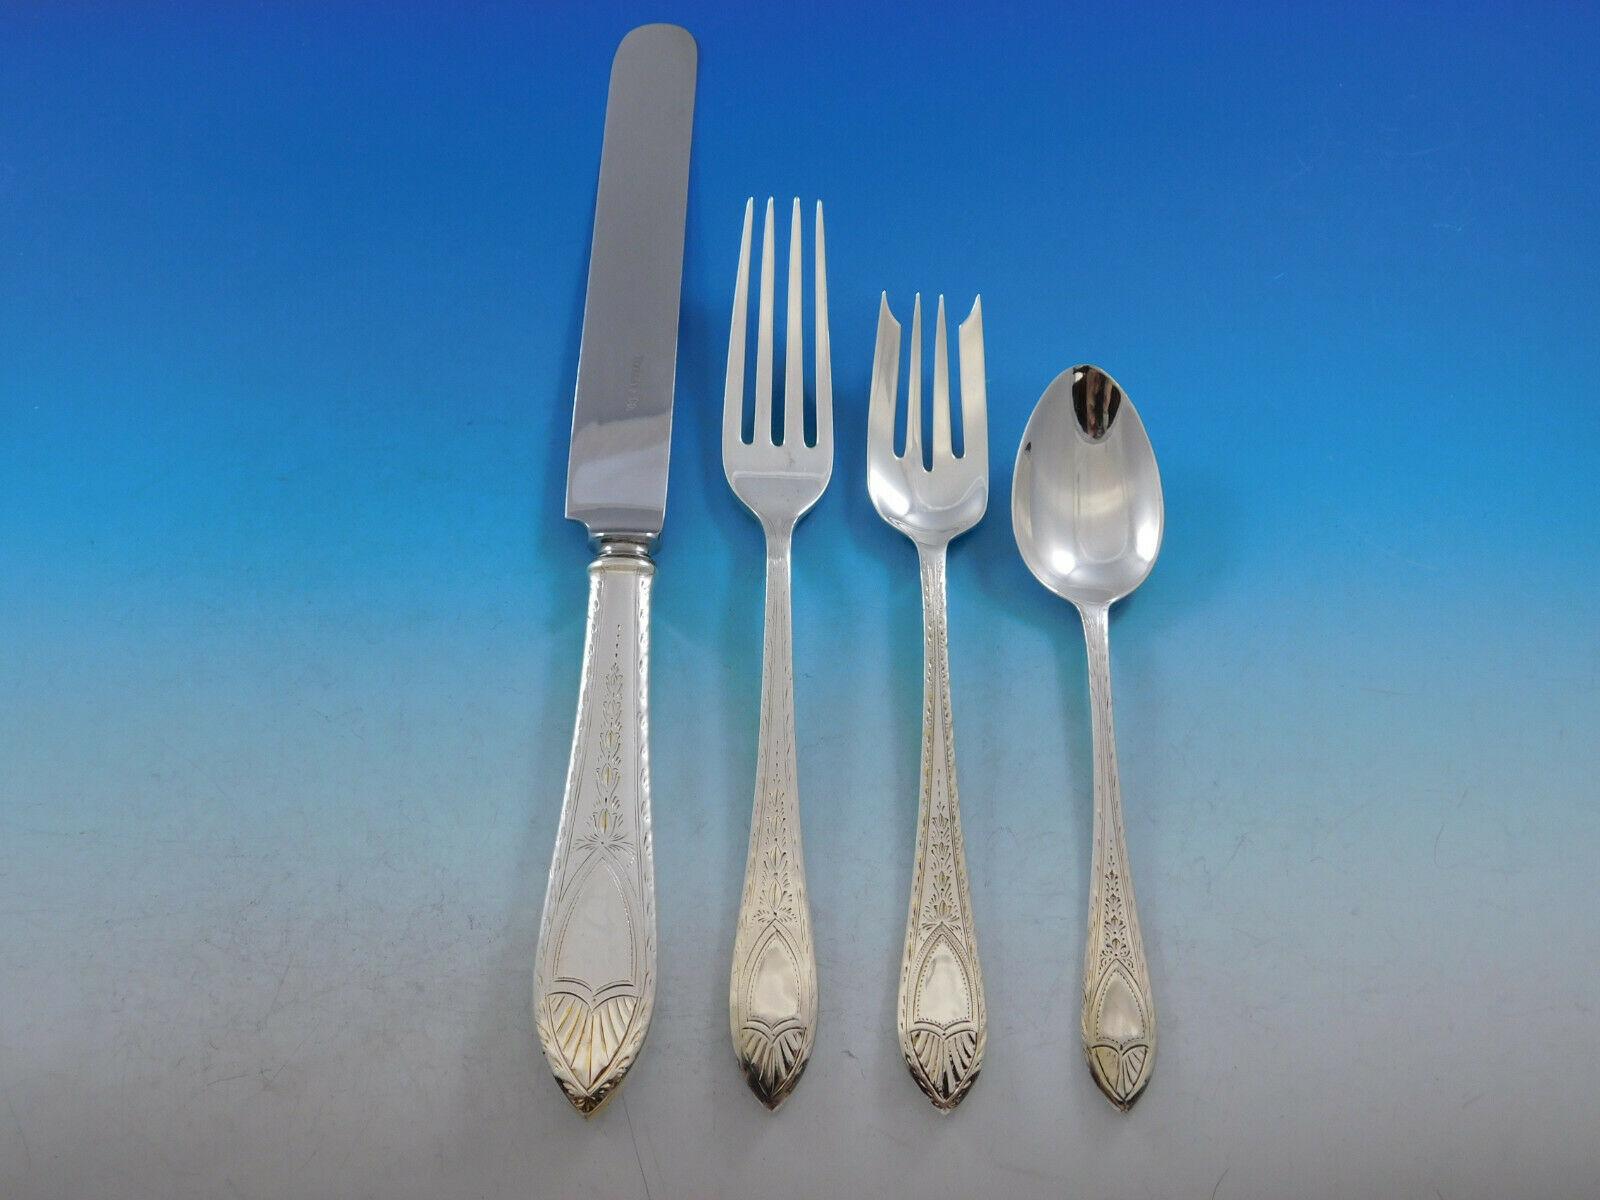 Faneuil engraved by Tiffany & Co. Sterling silver flatware set - 88 pieces. This set includes:

8 dinner size knives, 10 1/4